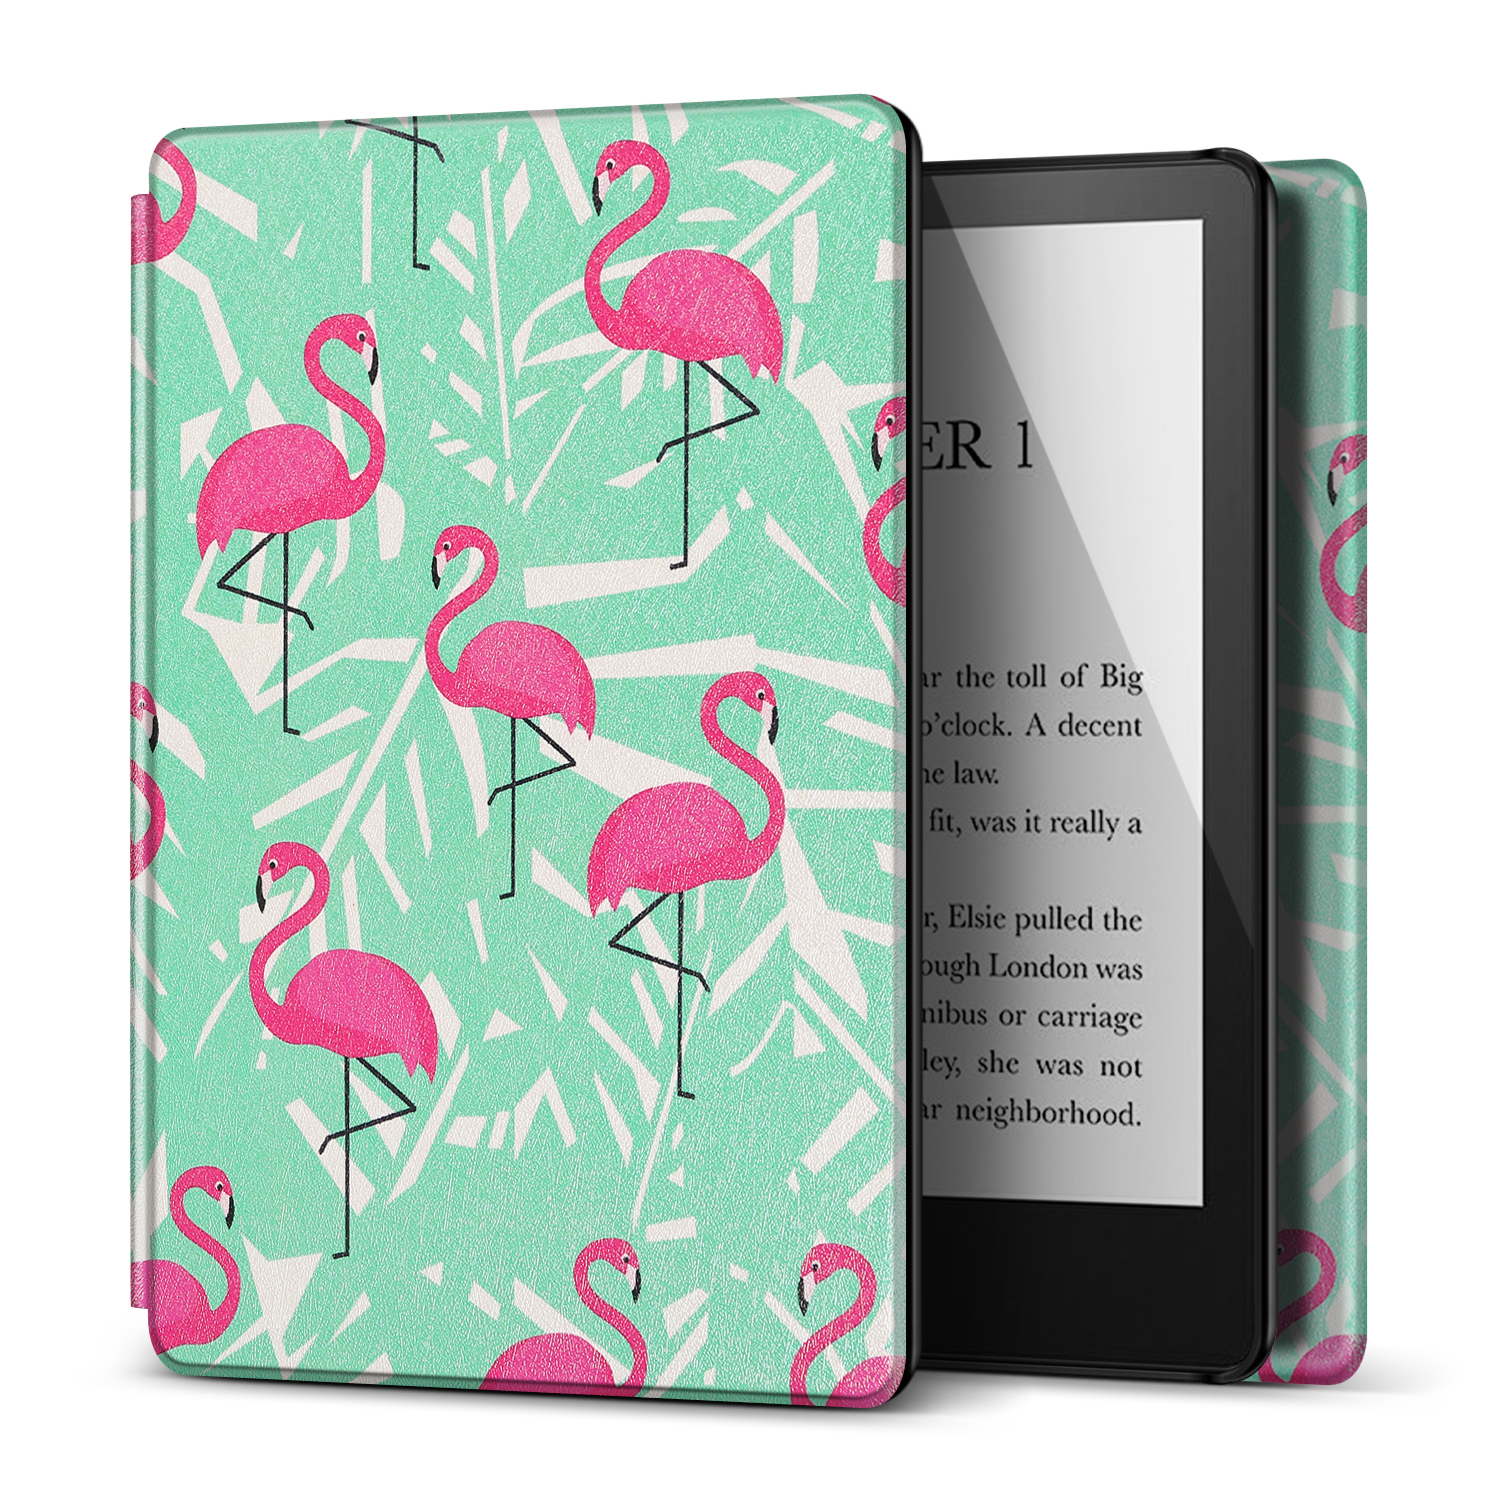 Case for 6.8" Kindle Paperwhite 11th Generation 2021 / Kindle Paperwhite Signature Edition, PU Leather Cover, Protective Sleeve Folio Case for Kindle E-Reader with Auto Sleep/Wake, Flamingo